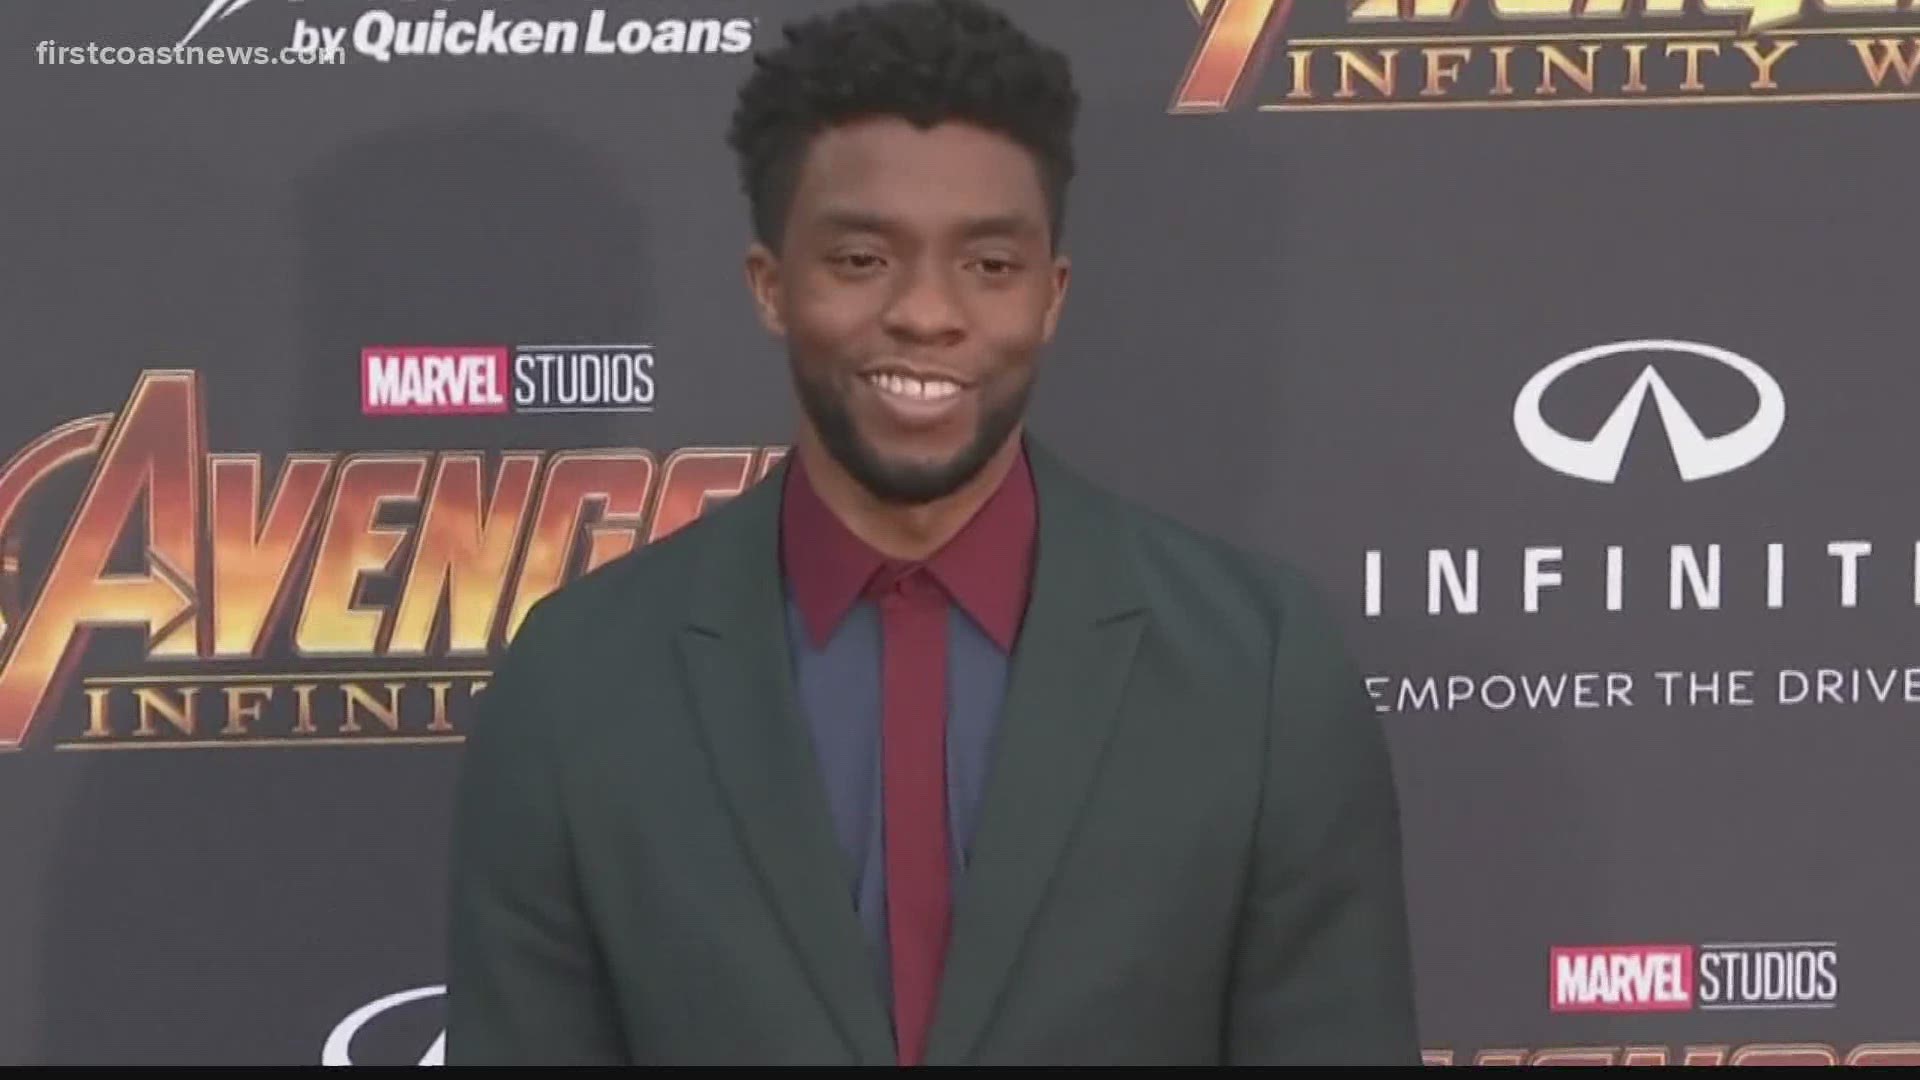 Actor Chadwick Boseman has died at the age of 43 after a years-long battle with colon cancer.